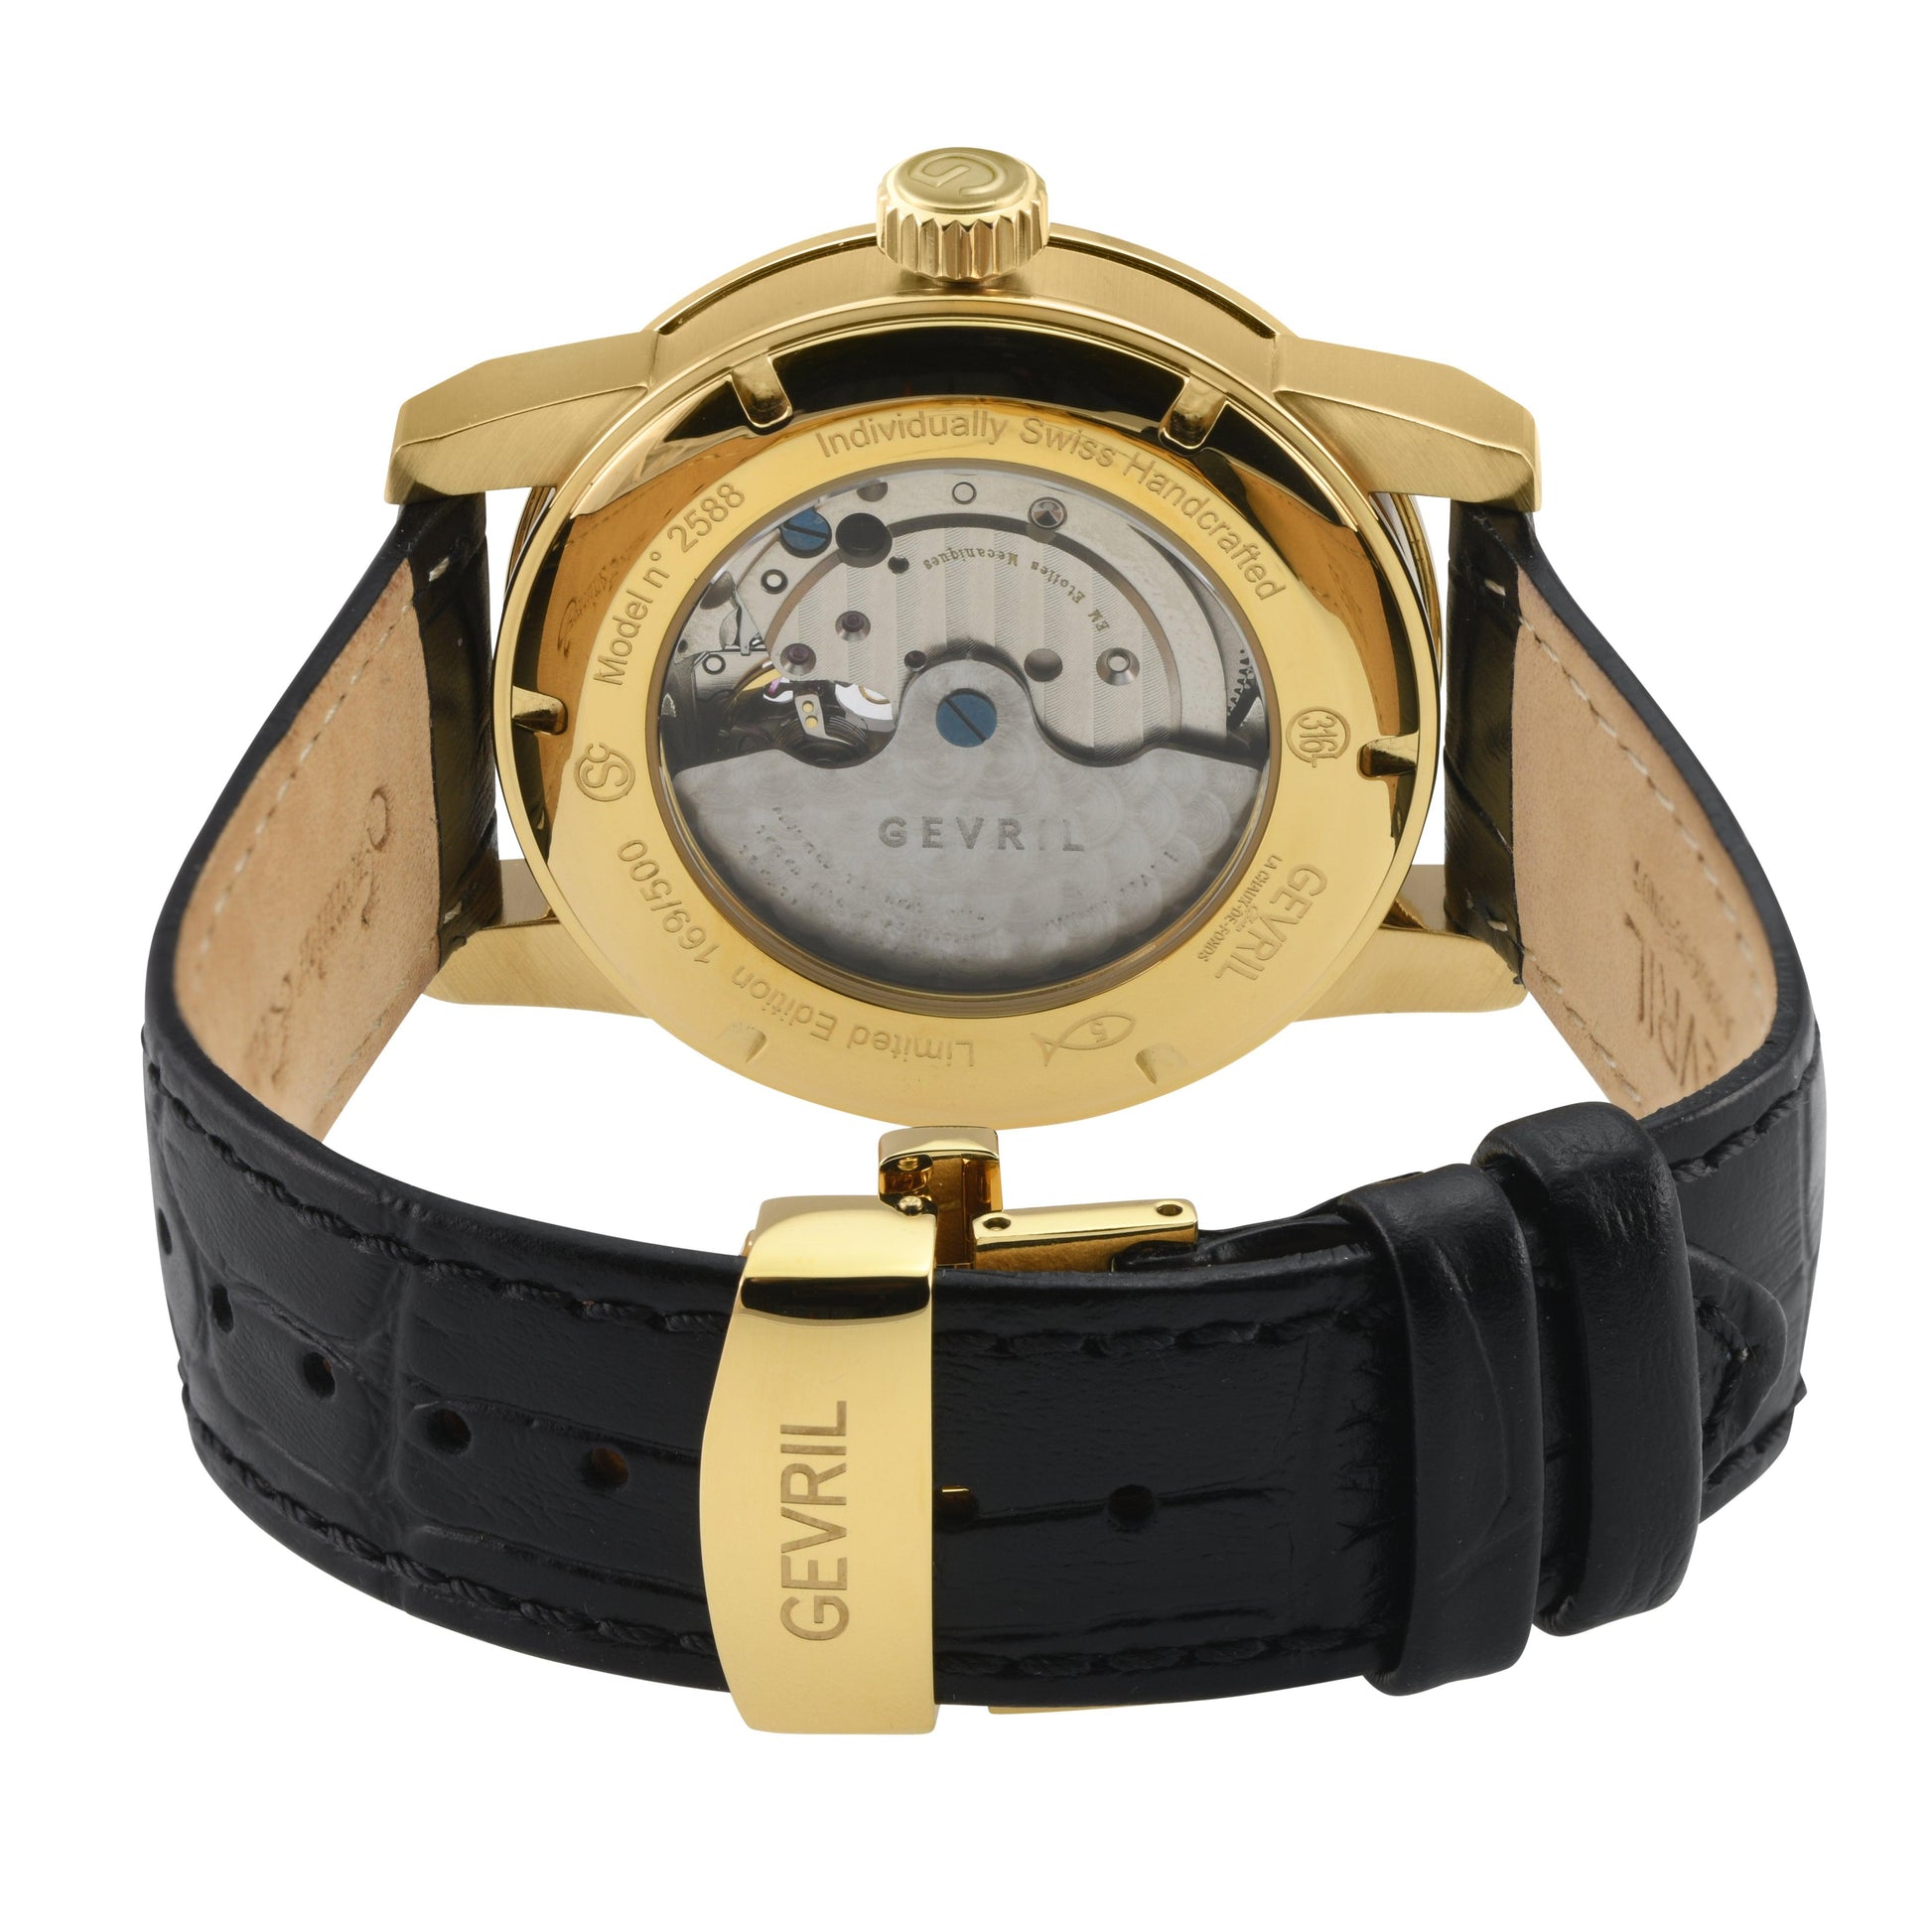 Gevril-Luxury-Swiss-Watches-Gevril Madison Automatic-2588